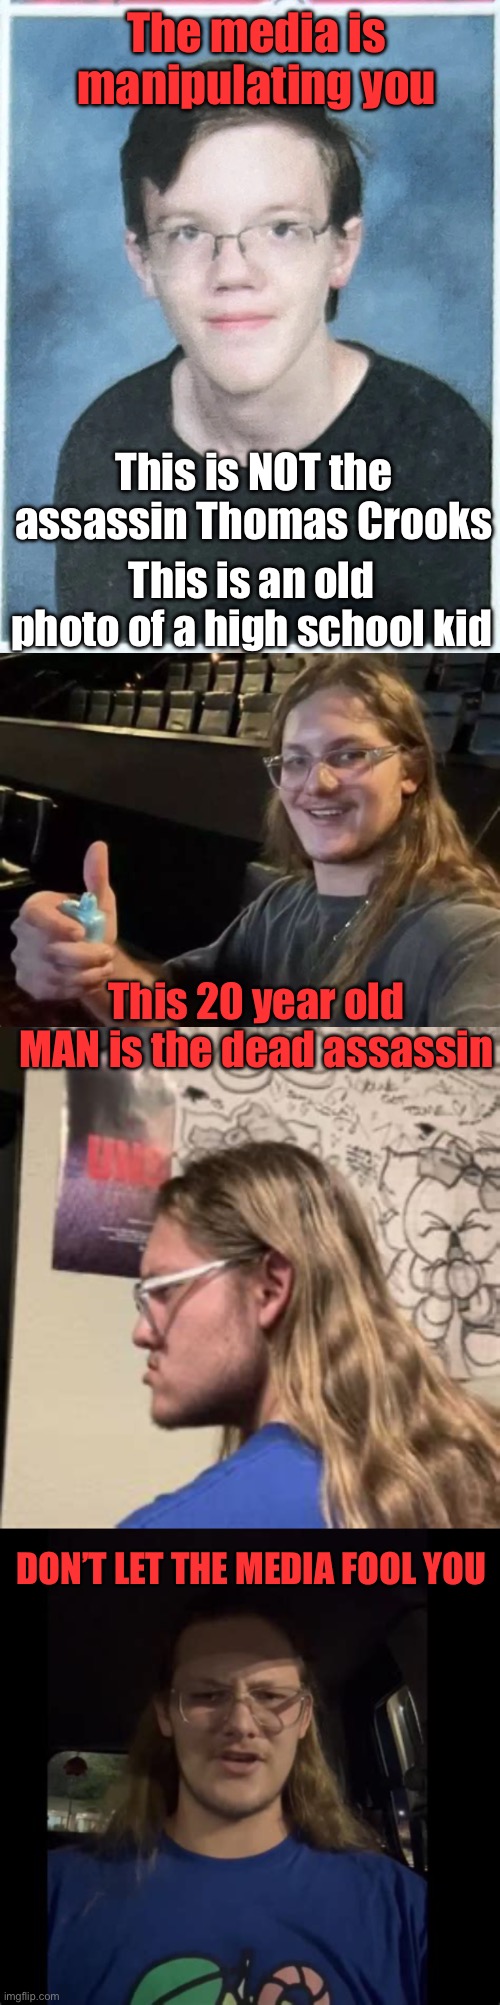 Once again the media is dishonest. | The media is manipulating you; This is NOT the assassin Thomas Crooks; This is an old photo of a high school kid; This 20 year old MAN is the dead assassin; DON’T LET THE MEDIA FOOL YOU | image tagged in media,dishonest,assassin,20 year old,man,thomas crooks | made w/ Imgflip meme maker